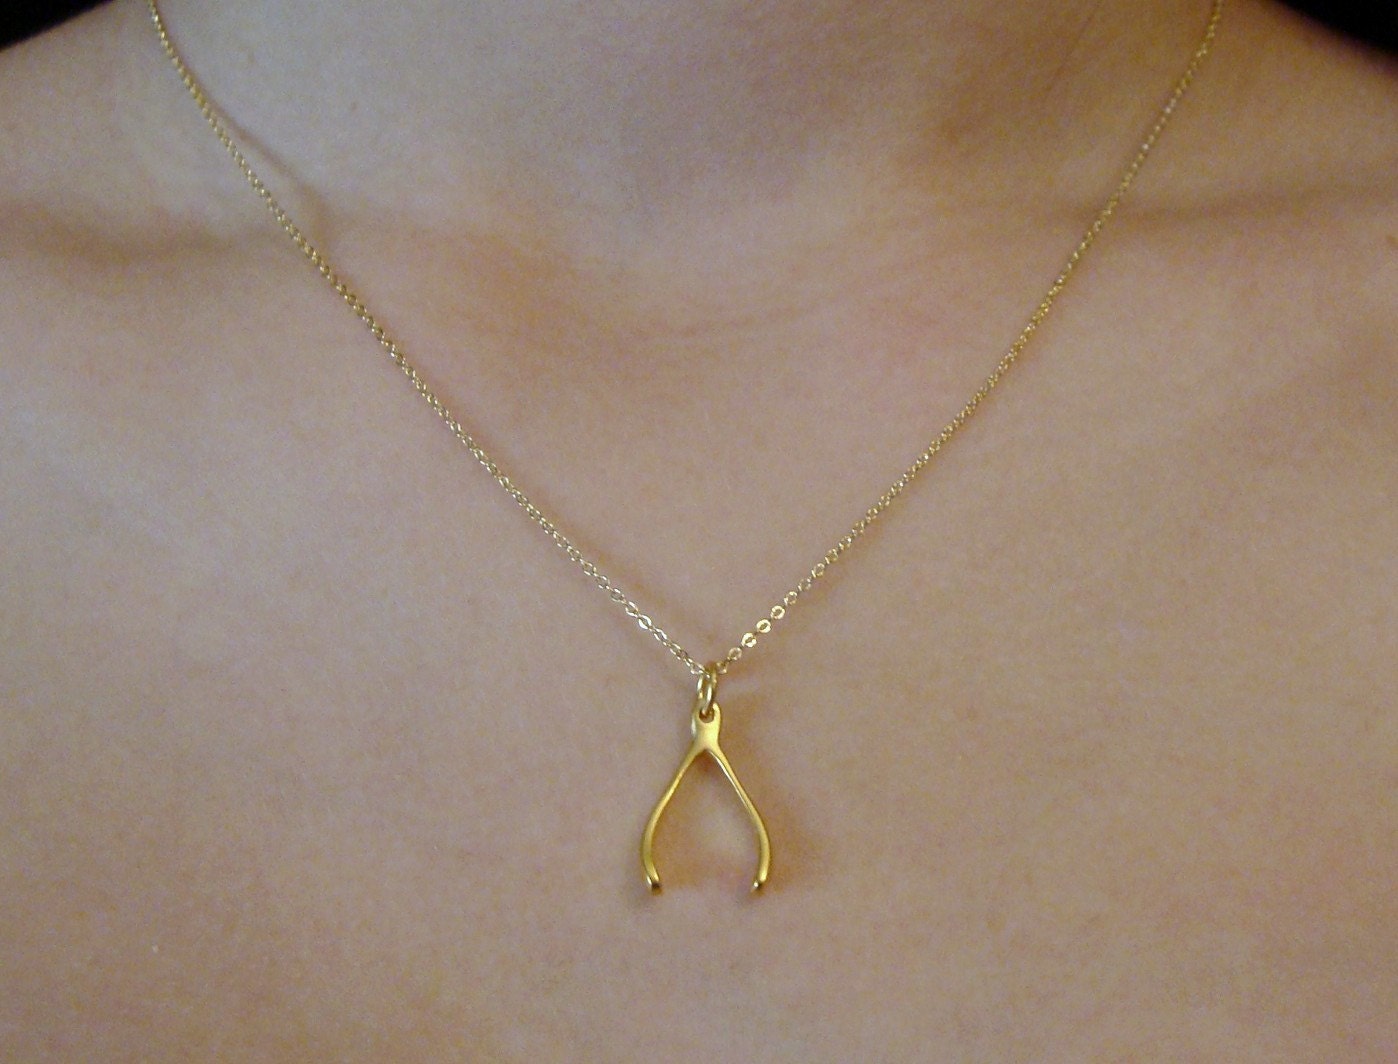 24k Gold Wishbone Necklace Gift for her BFF Friend